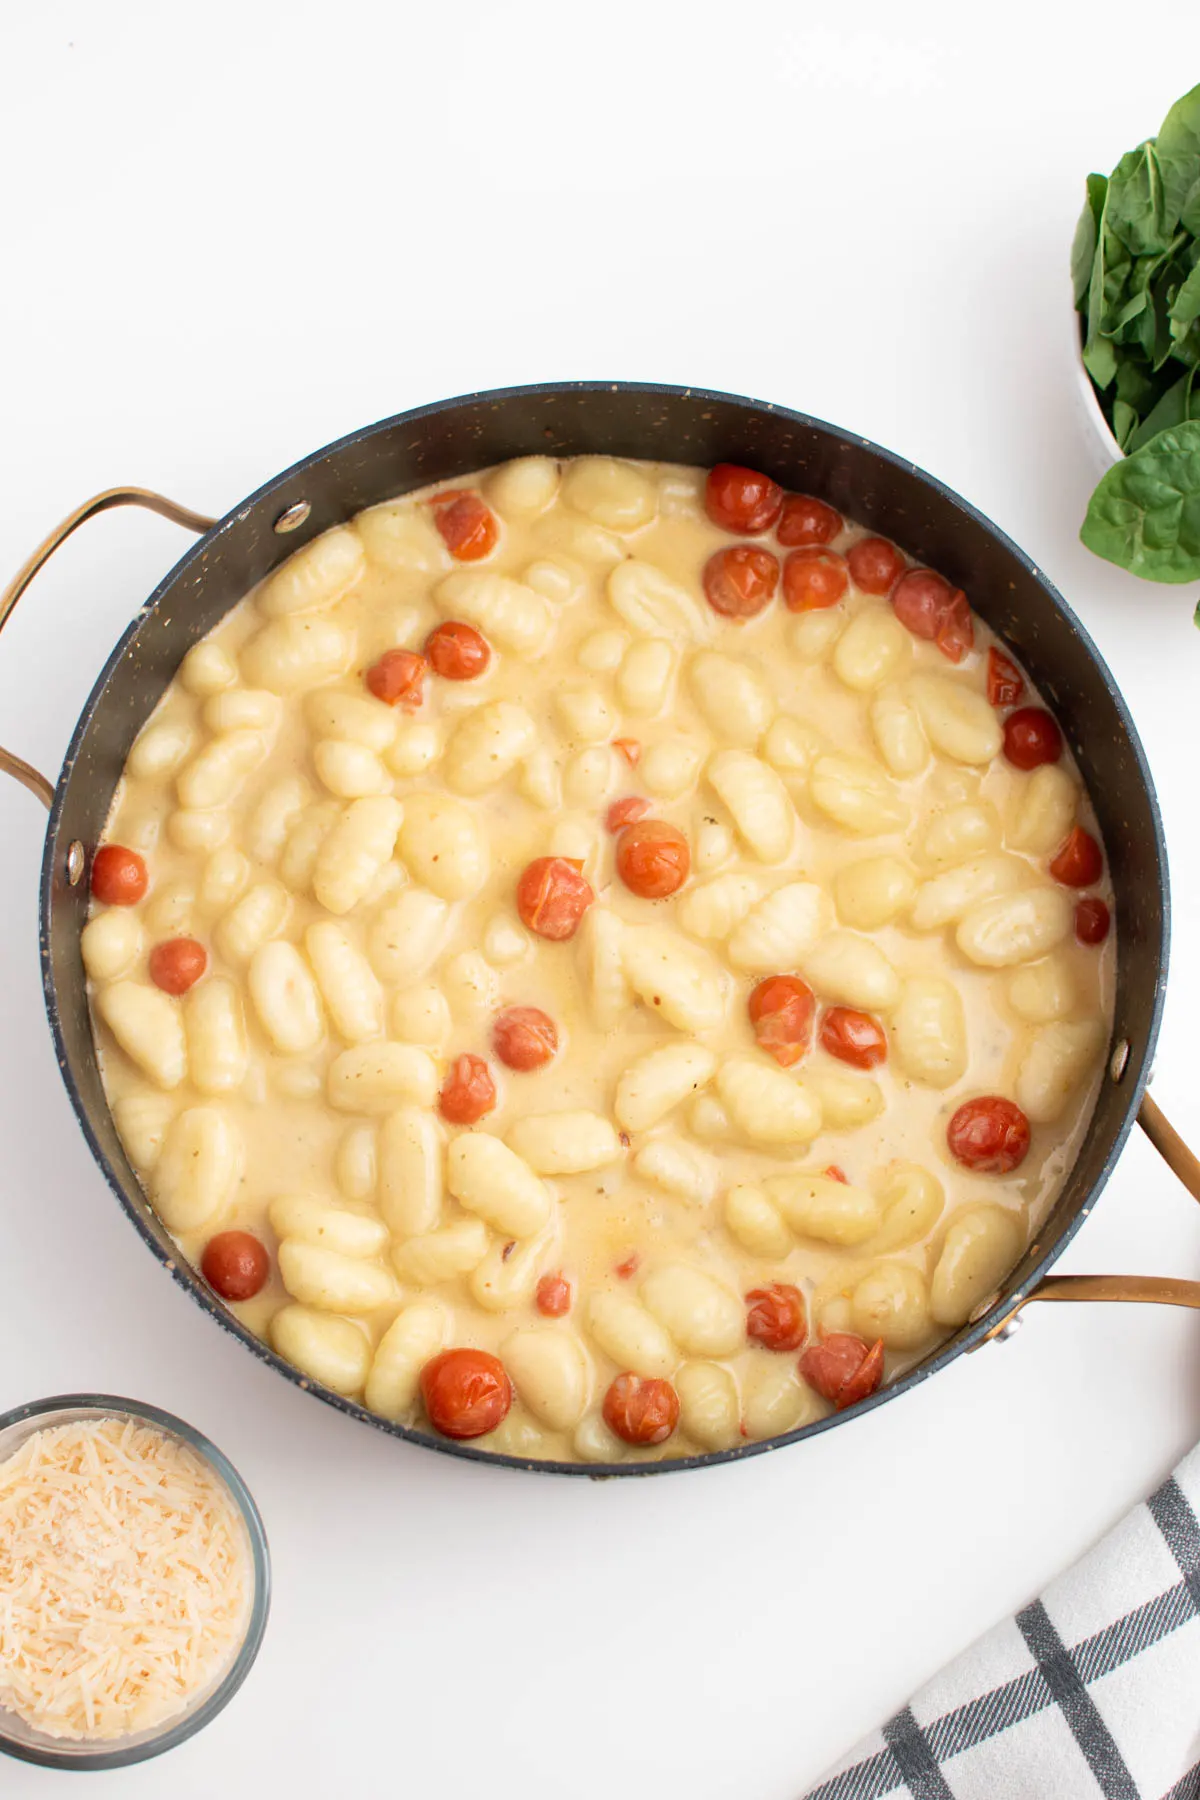 Tomatoes, gnocchi, and creamy sauce in large skillet surrounded by other ingredients.